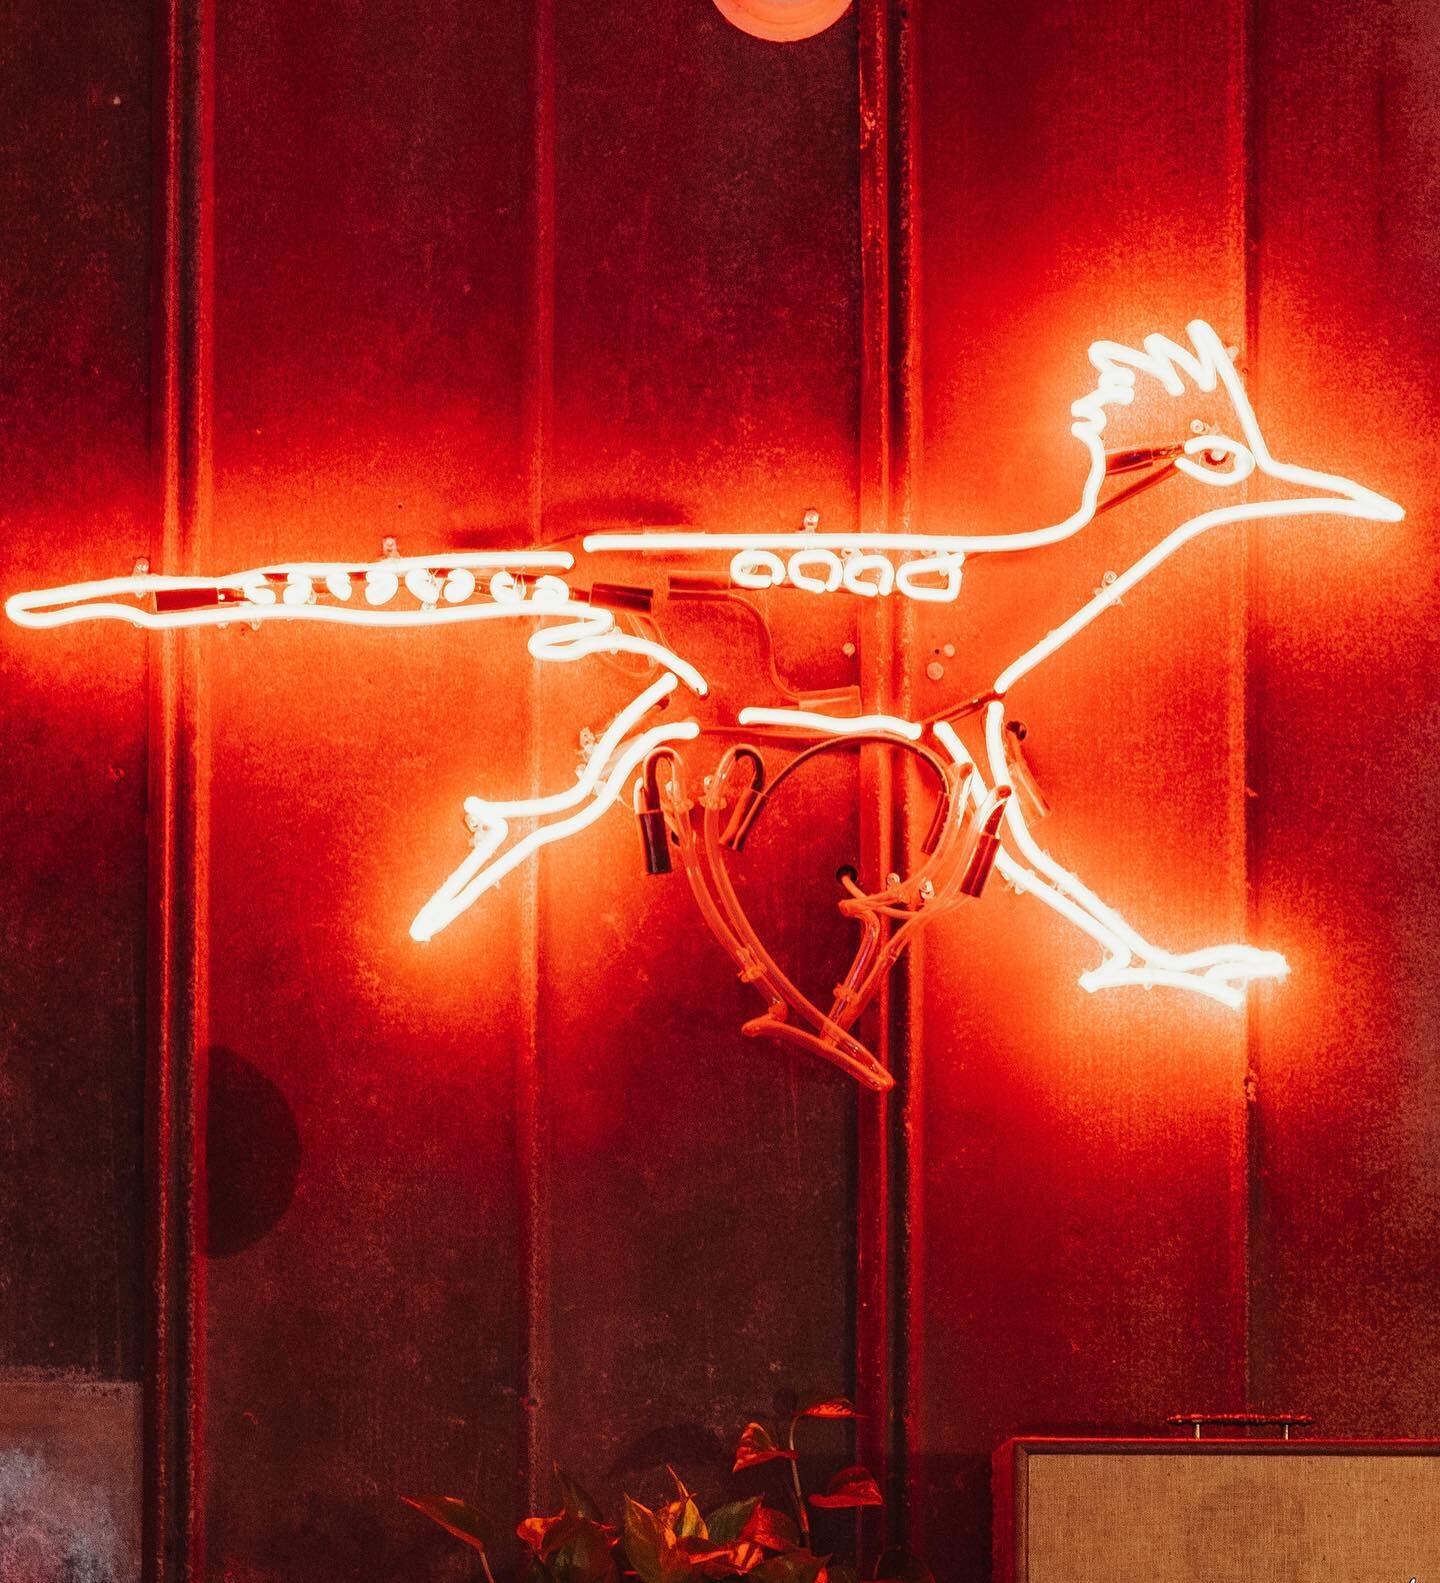 Get moving with us this weekend. We are grateful to have @bigdogneon downtown hooking everyone up with custom lights. 

📸 @jbaltierra.jpg 
#exploredowntownlockhart 
#begoodtoyourneighbors